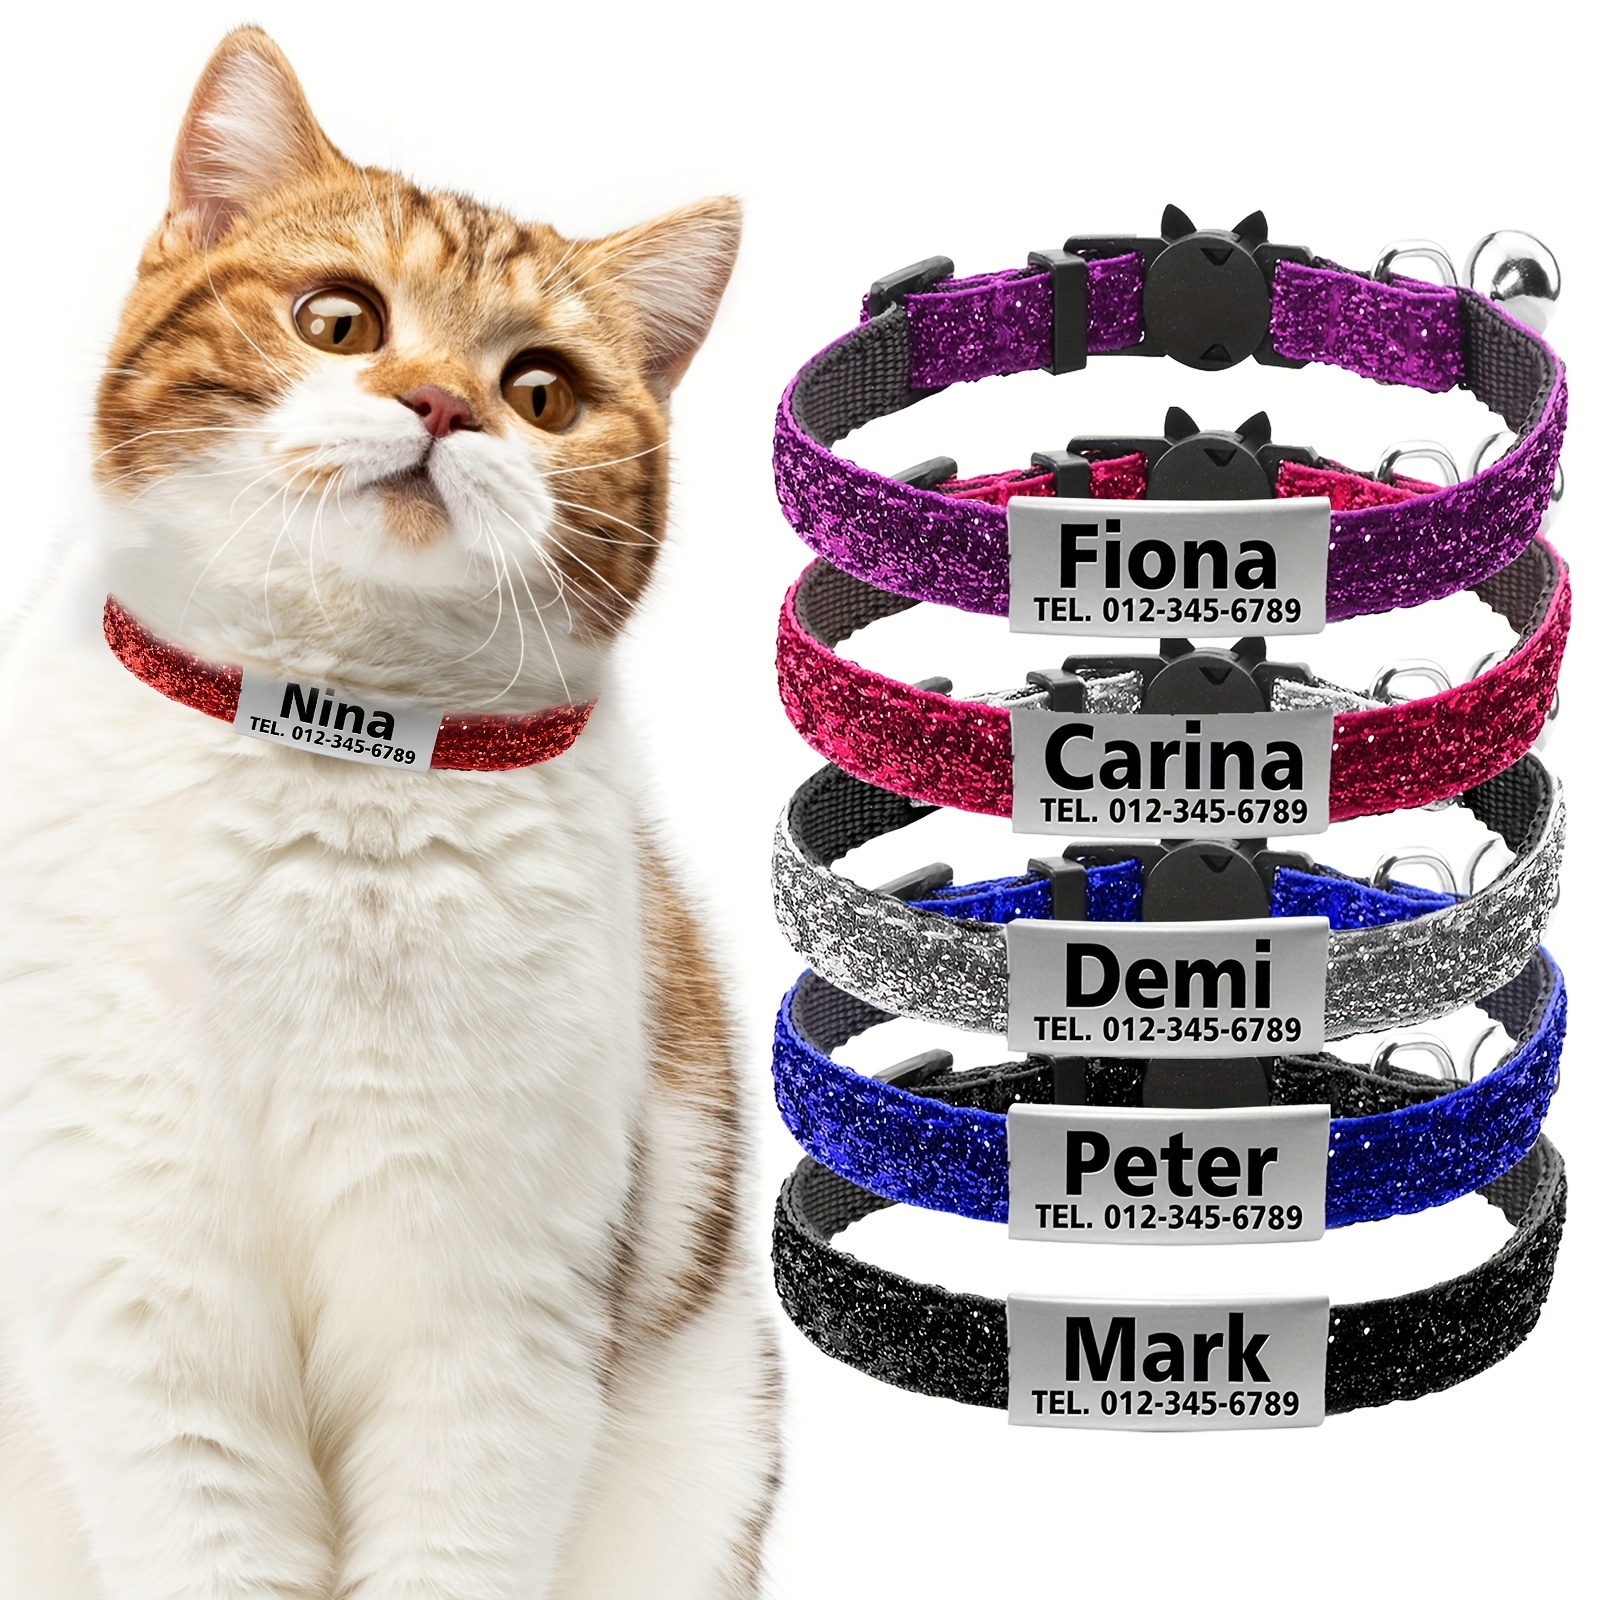 

Personalized Soft Safe Cat Adjustable Bling Collar With Bells, Adjustable Basic Collar For Small Medium Dogs, Cats, Kitten And Puppy With Buckle